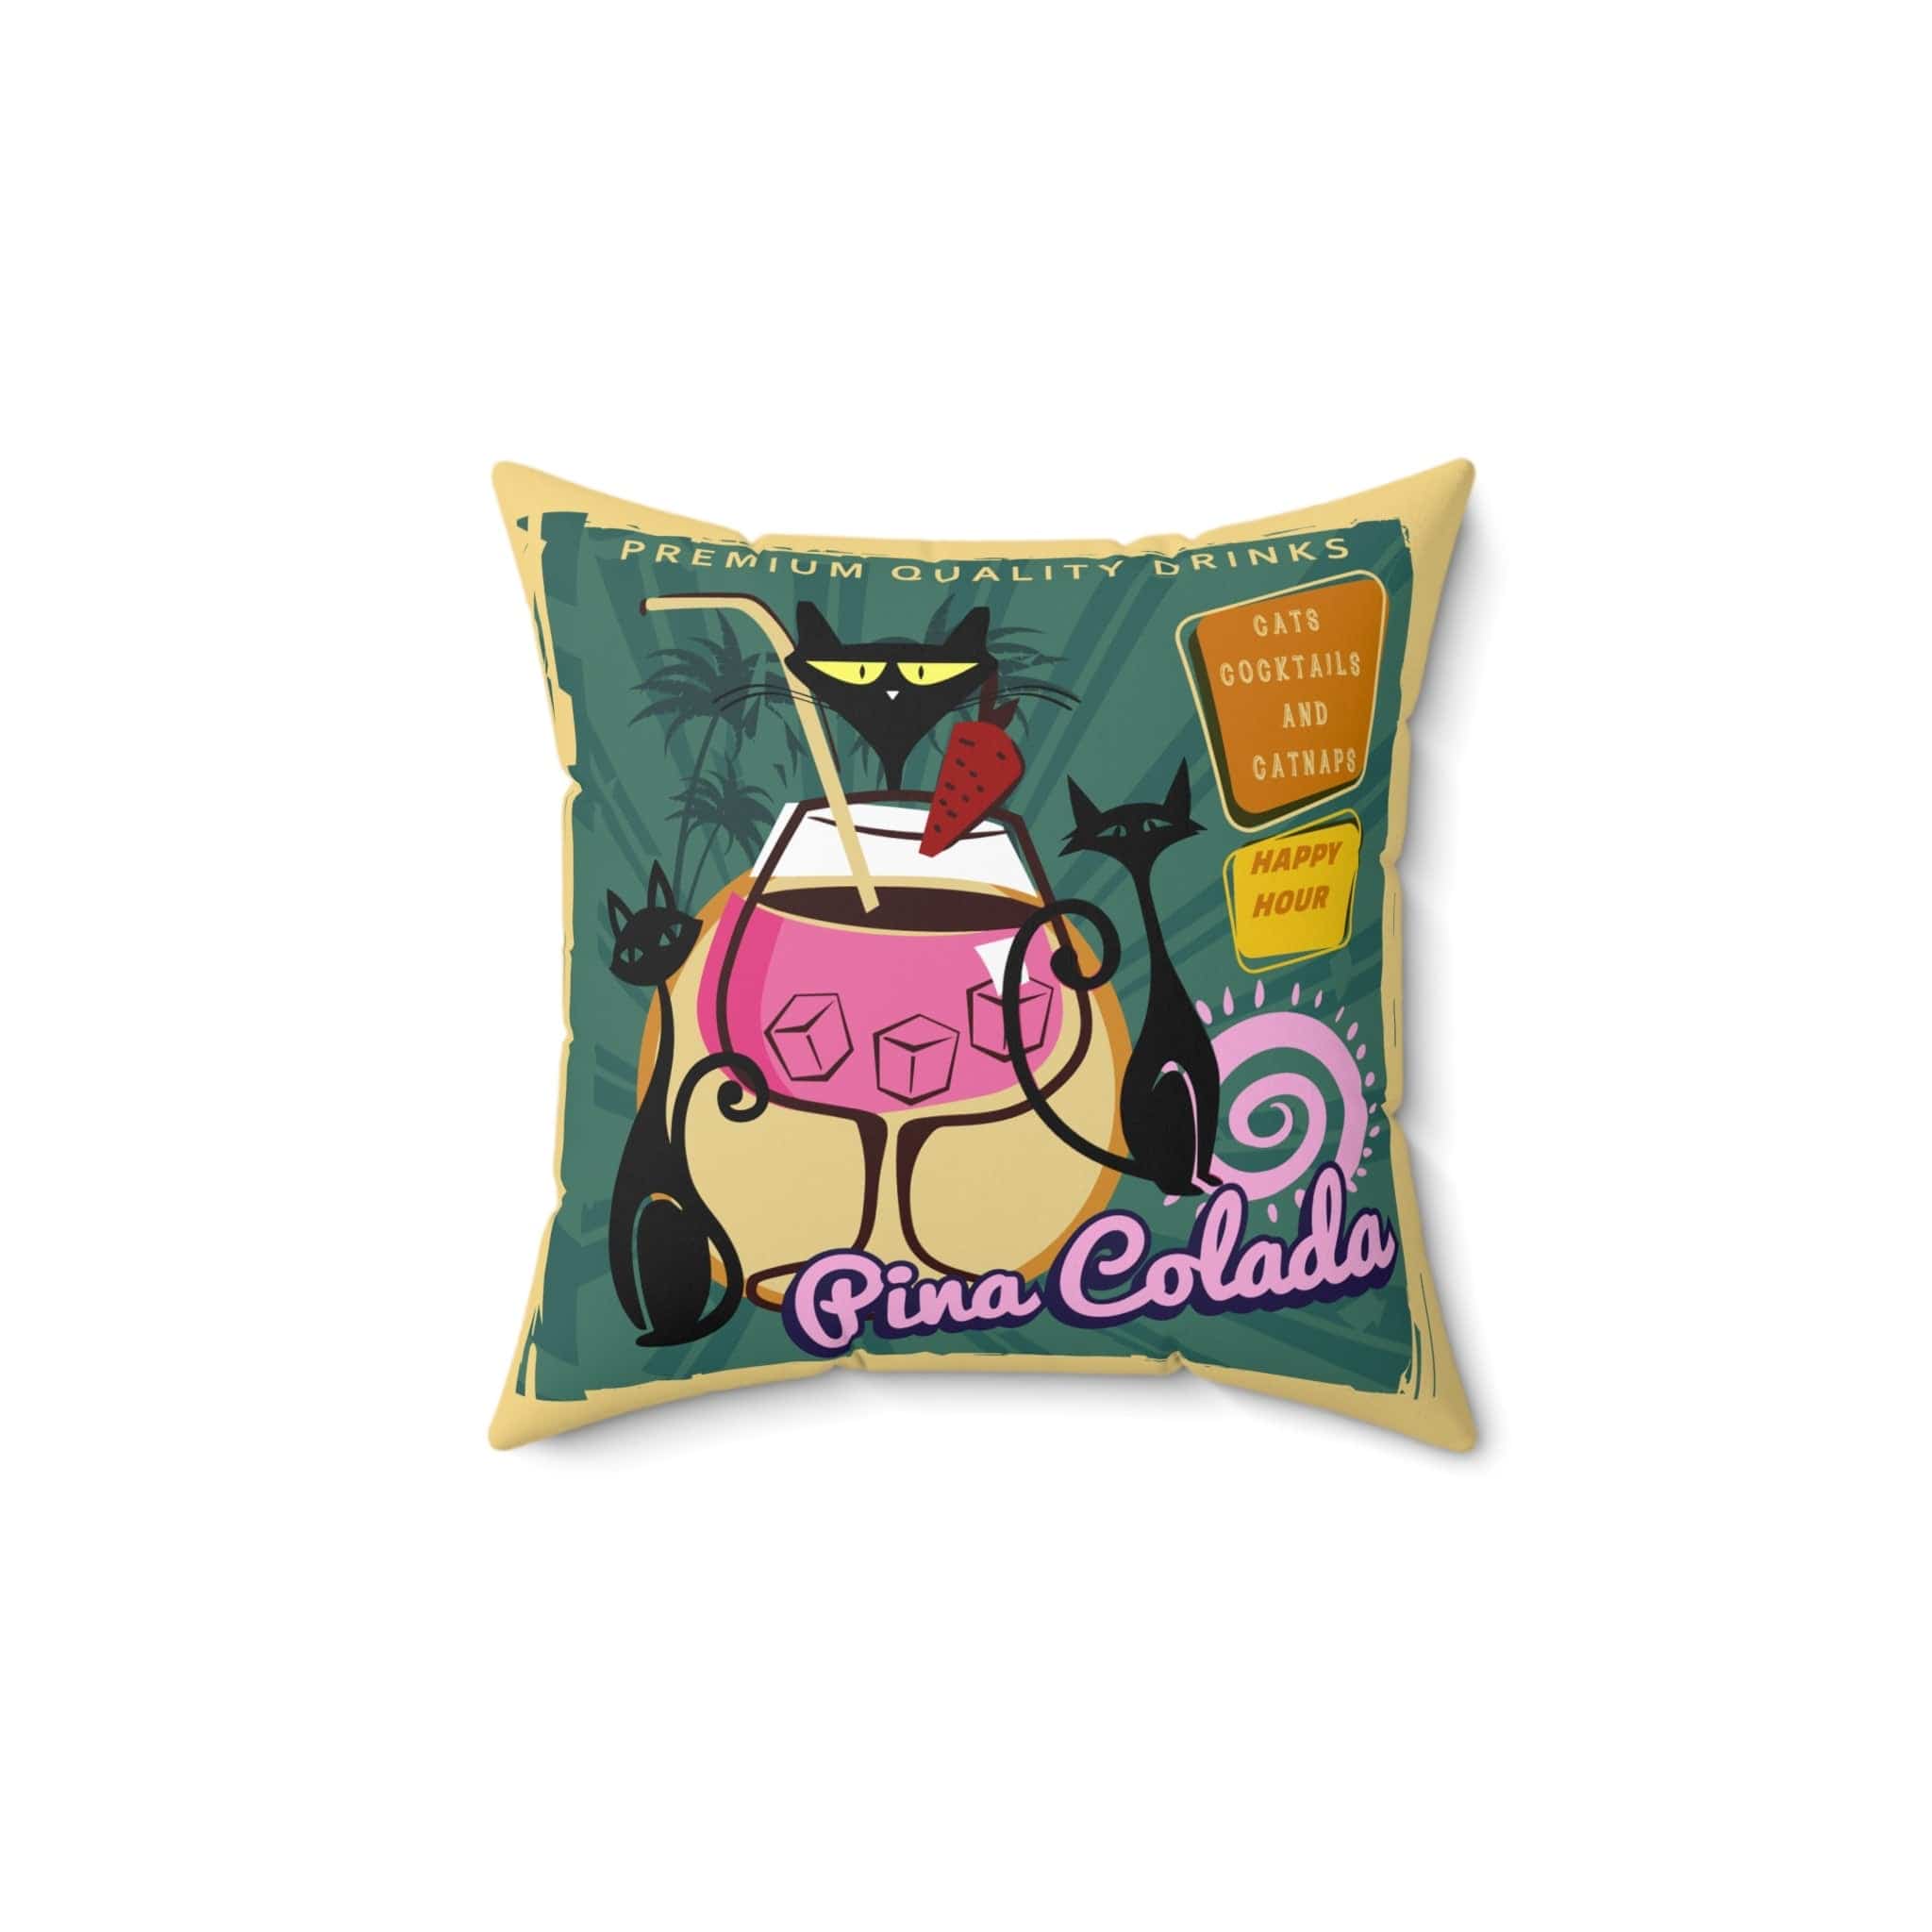 Kate McEnroe New York Cats, Cocktails and Catnaps Throw Pillow, 1950s Vintage Diner Atomic Cat Poster Art, Mid Century Modern Retro Accent Pillow - KM13549723Throw Pillows12601441140818807448